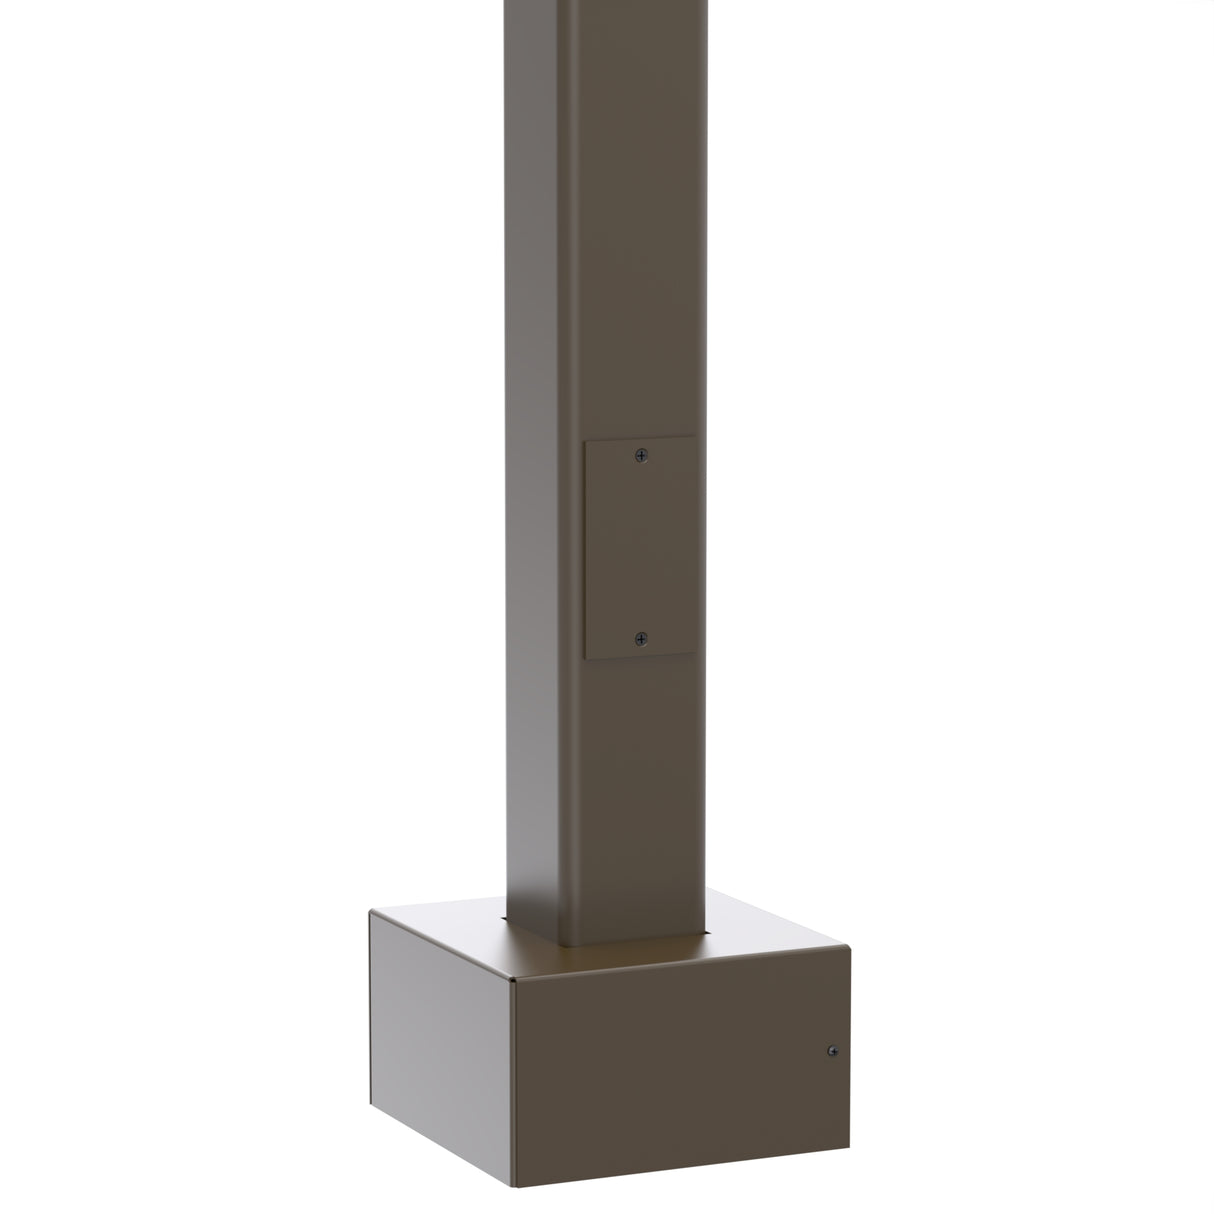 12' Tall x 4.0" OD x 0.125" Thick, Square Straight Aluminum, Anchor Base Light Pole